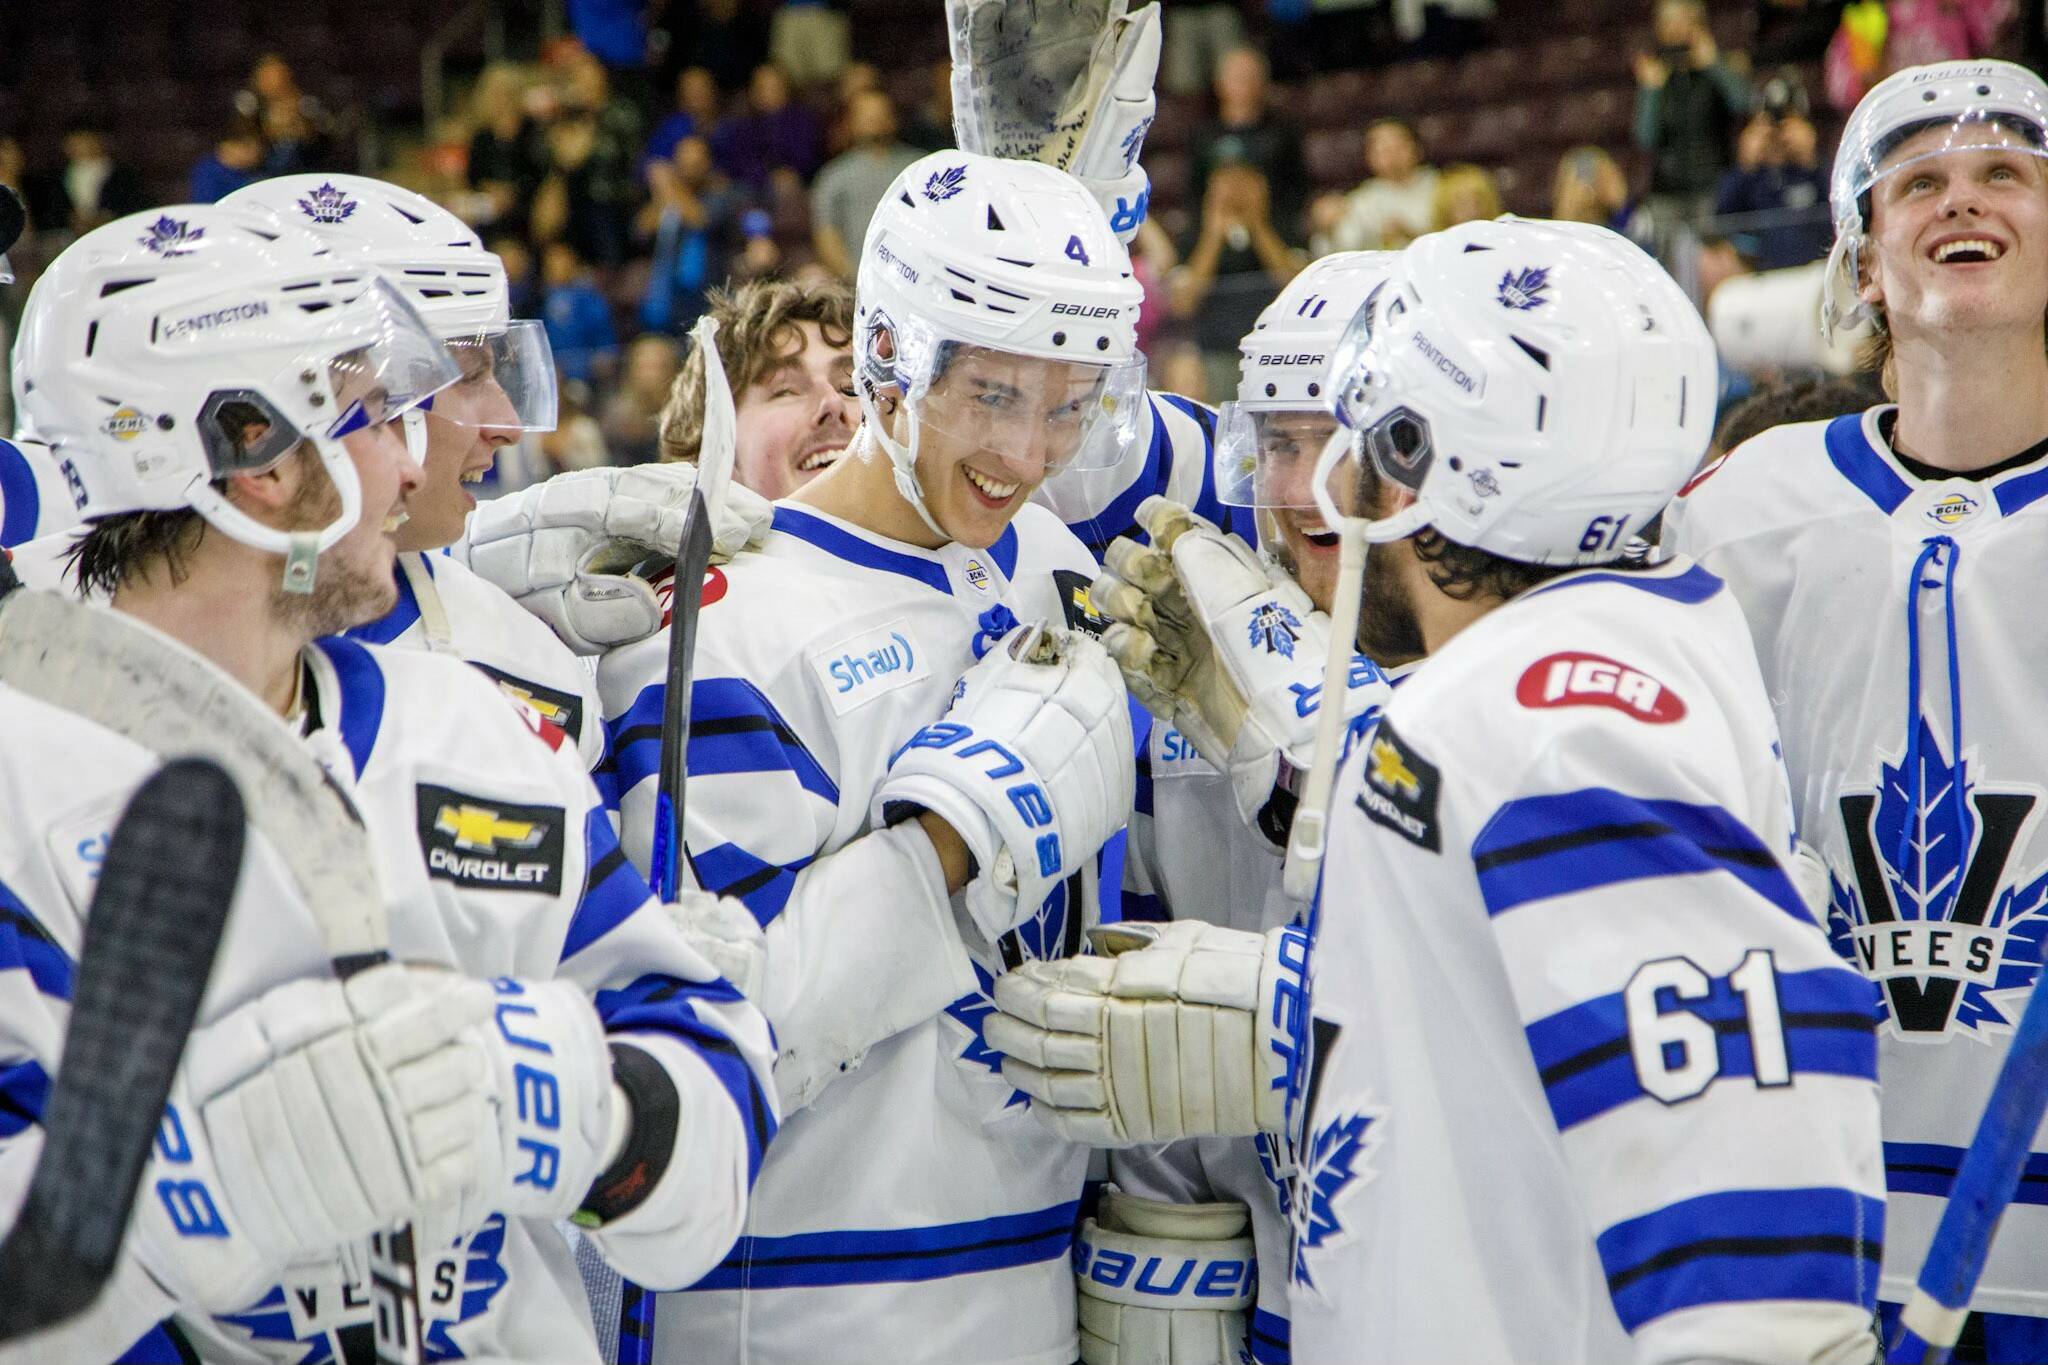 Penticton Vees defenceman Nolan Stevenson (No. 4) celebrates with his teammates after scoring two goals in Game 7 and leading his team past the Salmon Arm Silverbacks in the Interior Conference Finals. (Photo- Cherie Morgan)